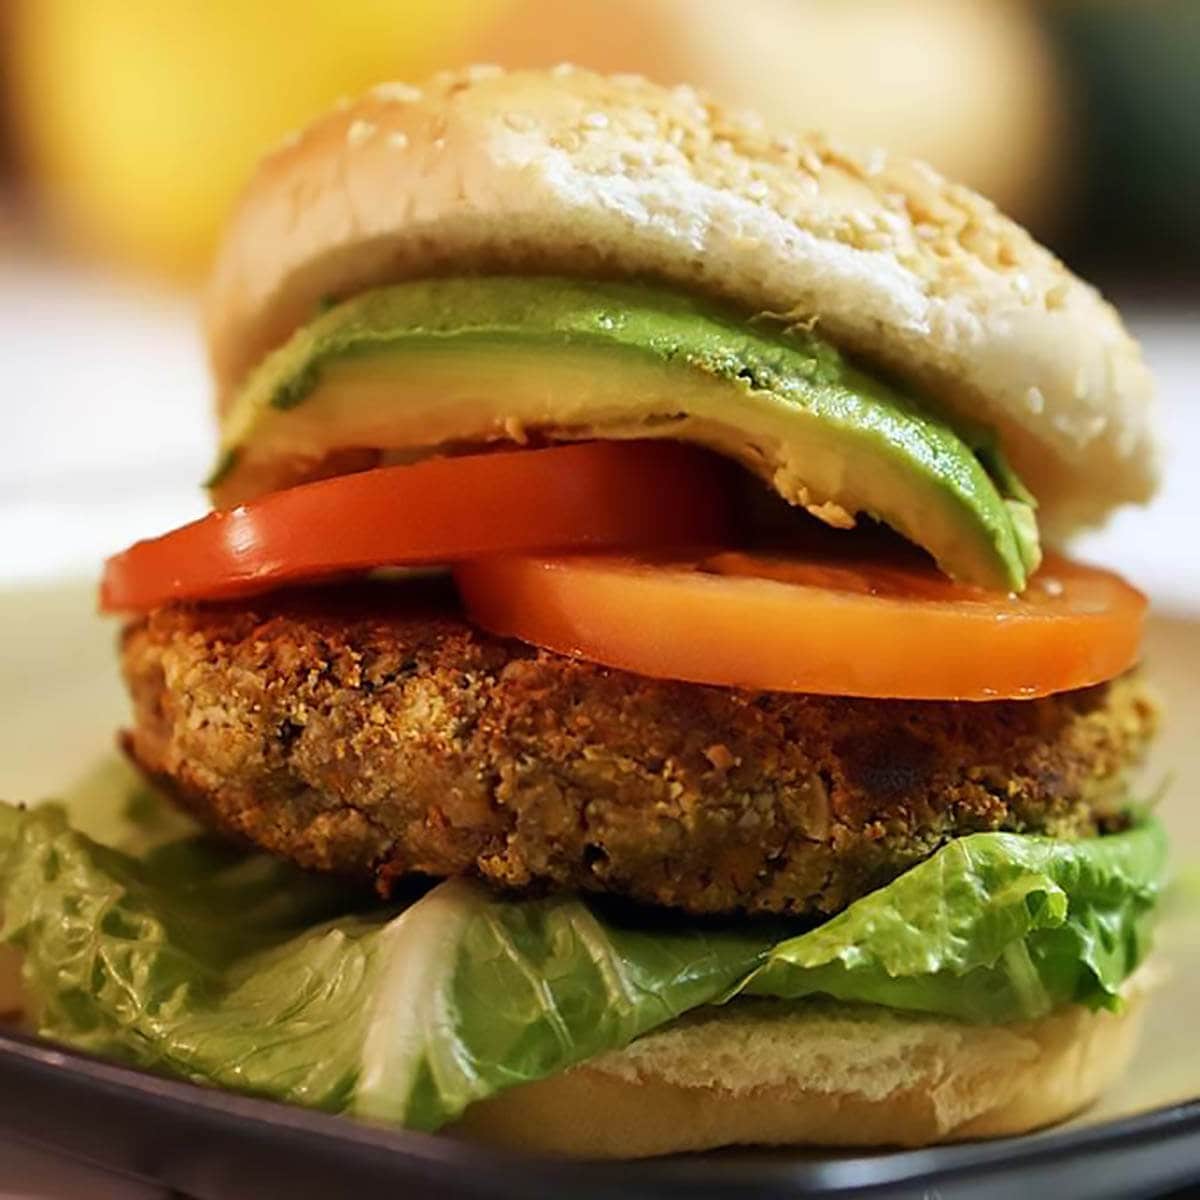 Burger on bun topped with lettuce, diced tomatoes and avocado.